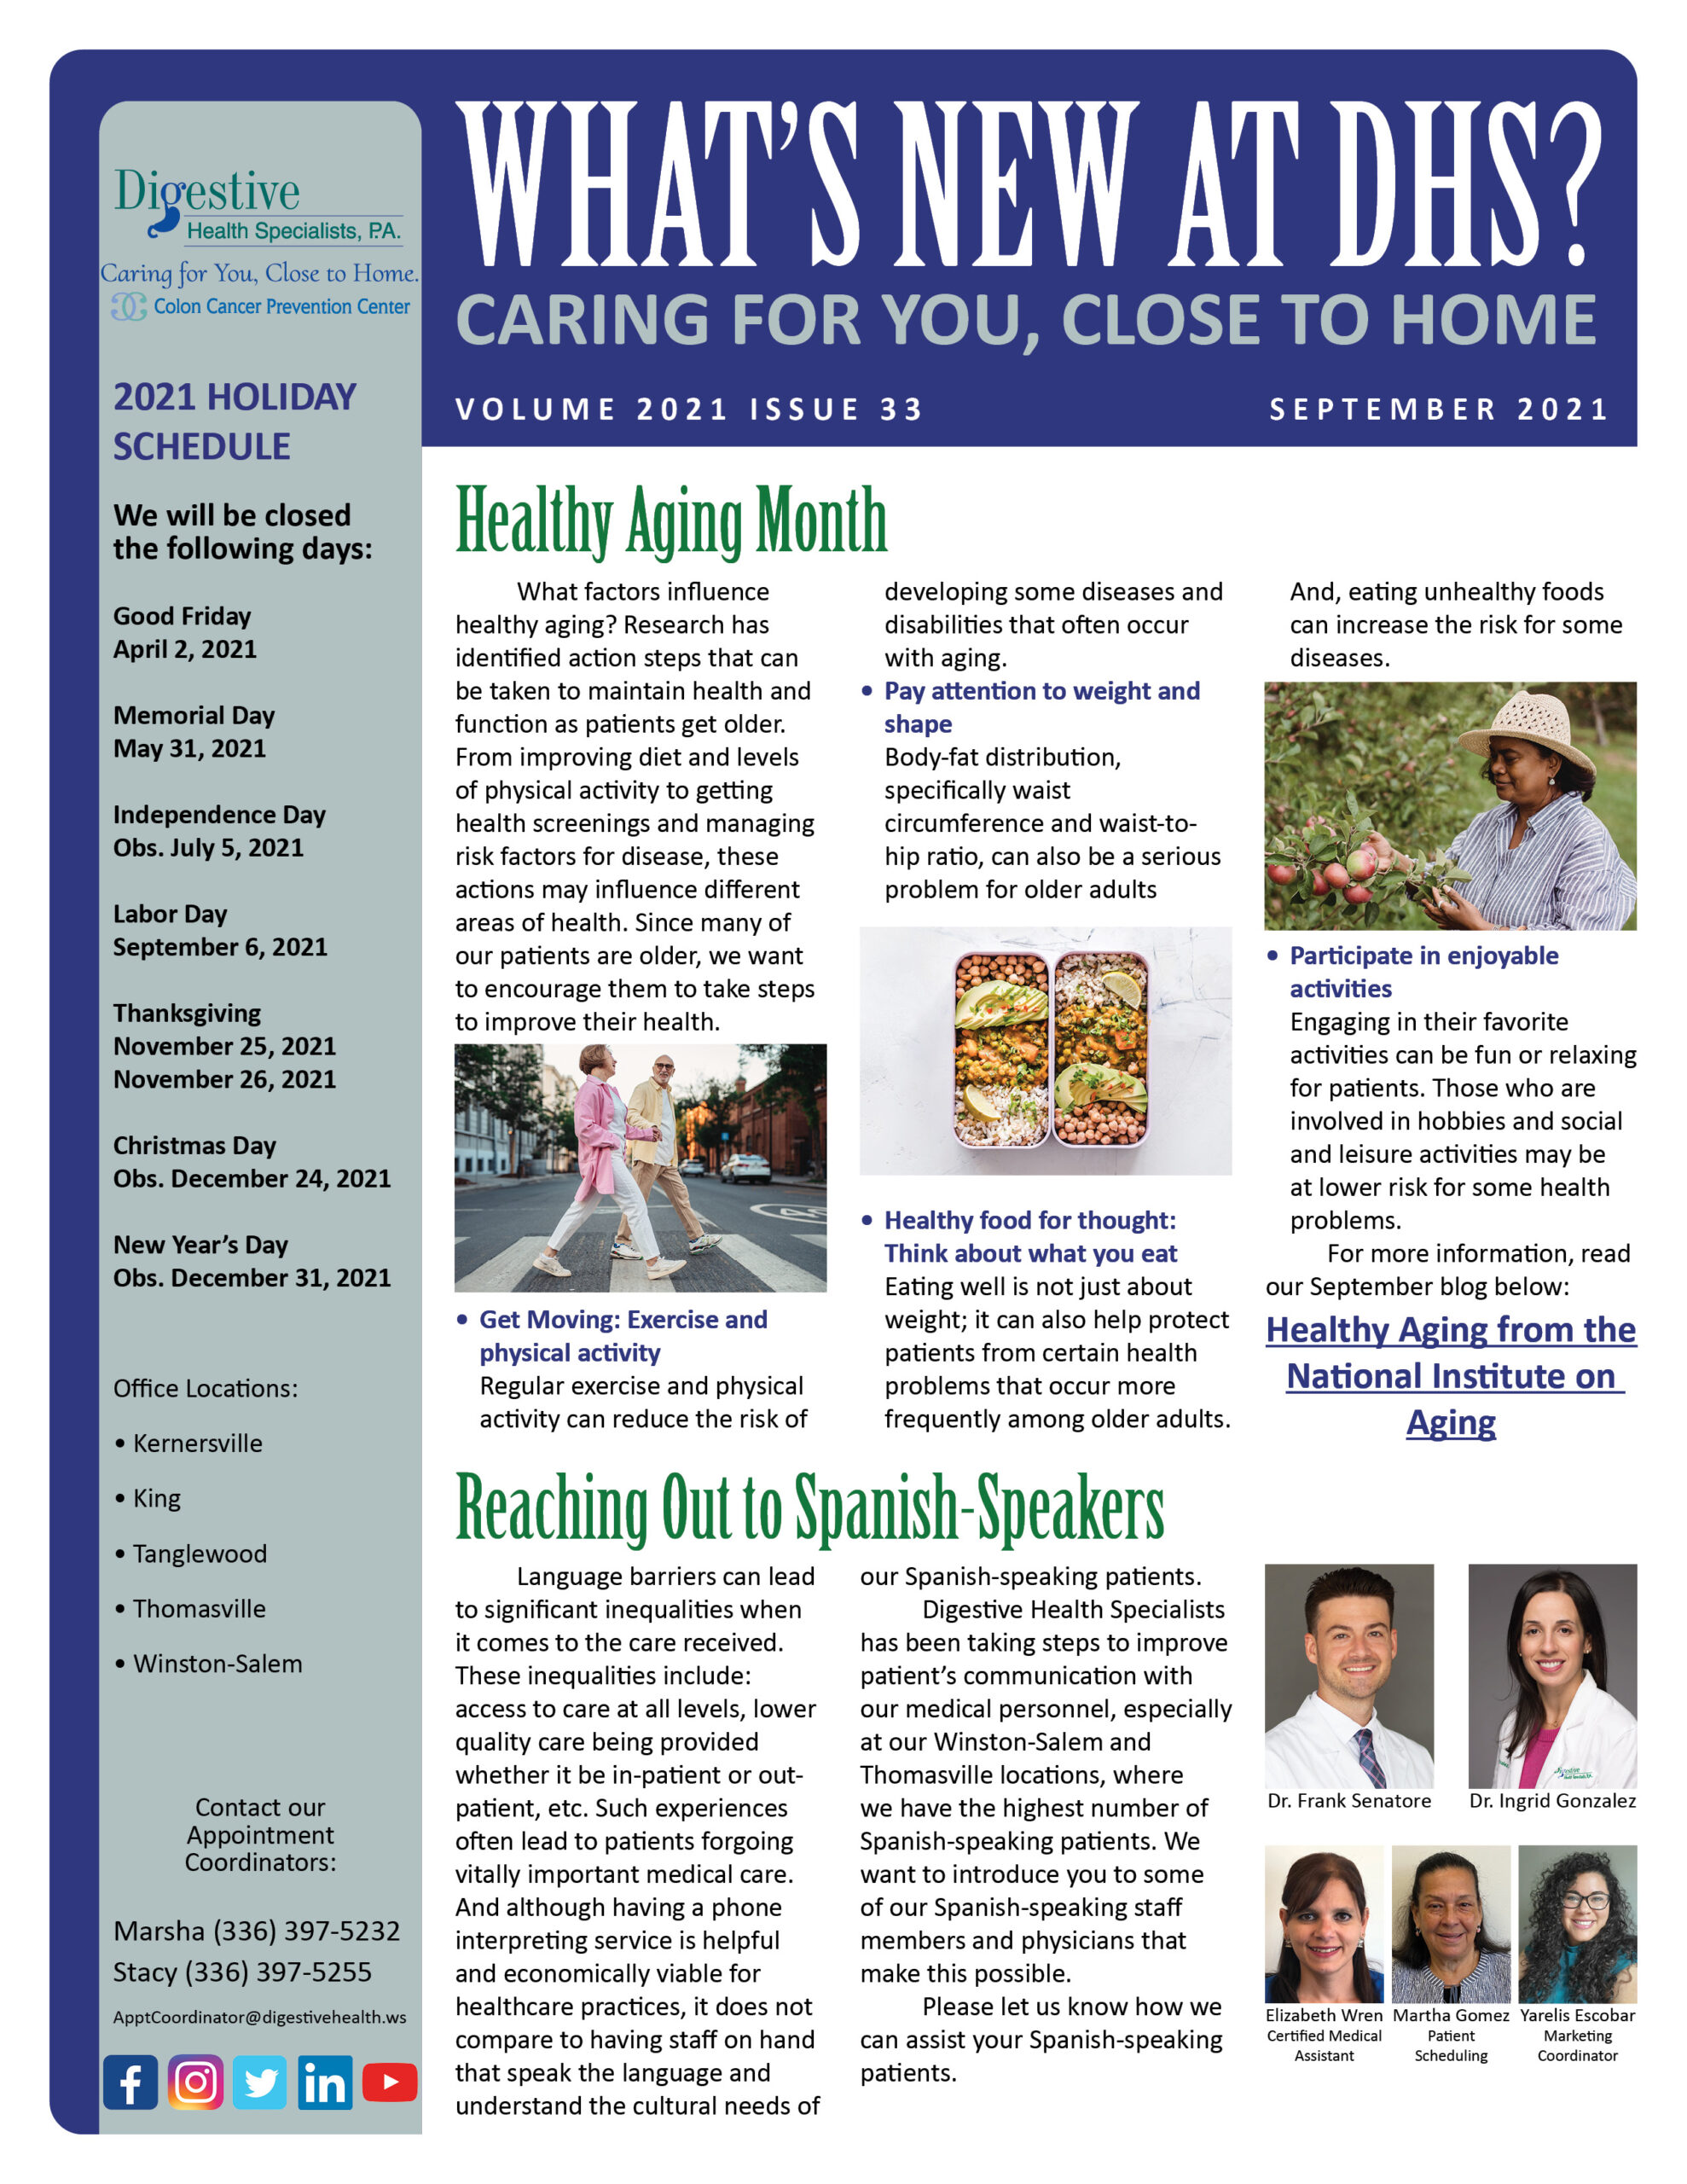 September 2021 newsletter for referring physicians about health aging